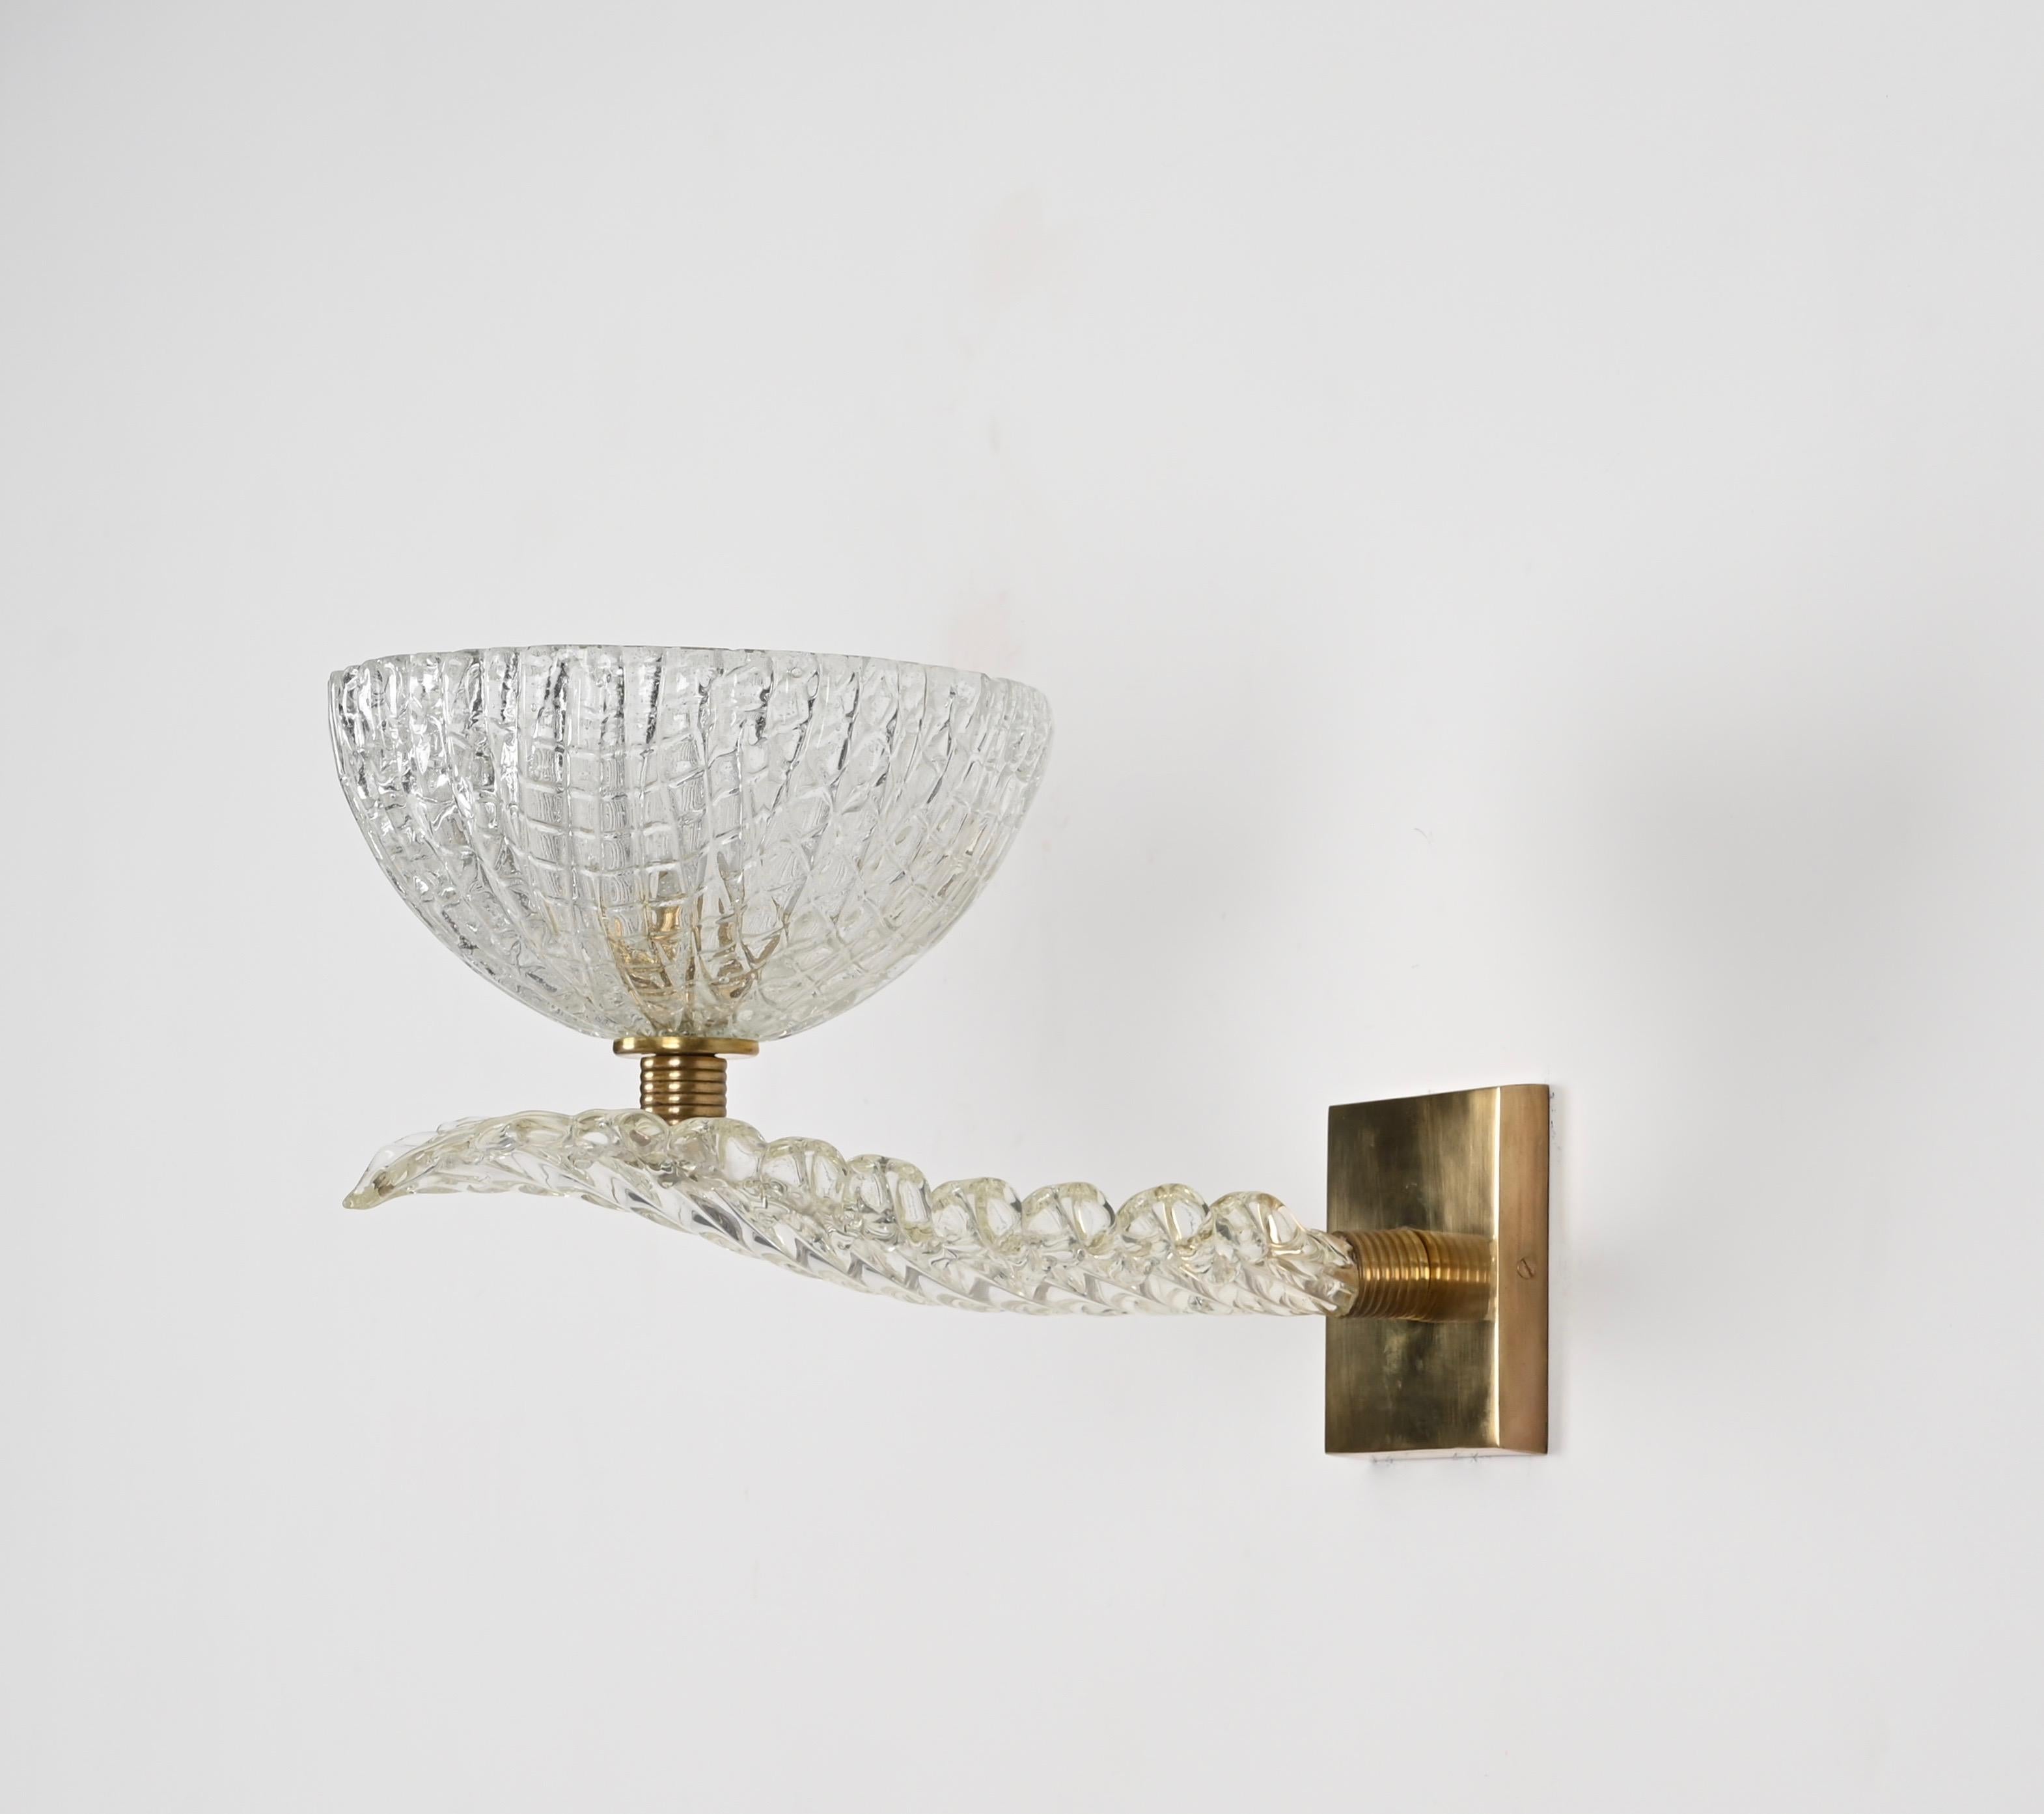 Incredible pair of enormous sconces fully hand-made in Murano mouth blown crystal glass and solid brass. These mind-blowing wall lamps were designed by Barovier made in Murano, Italy during the 1950s.

These incredibly rare sconces feature a big